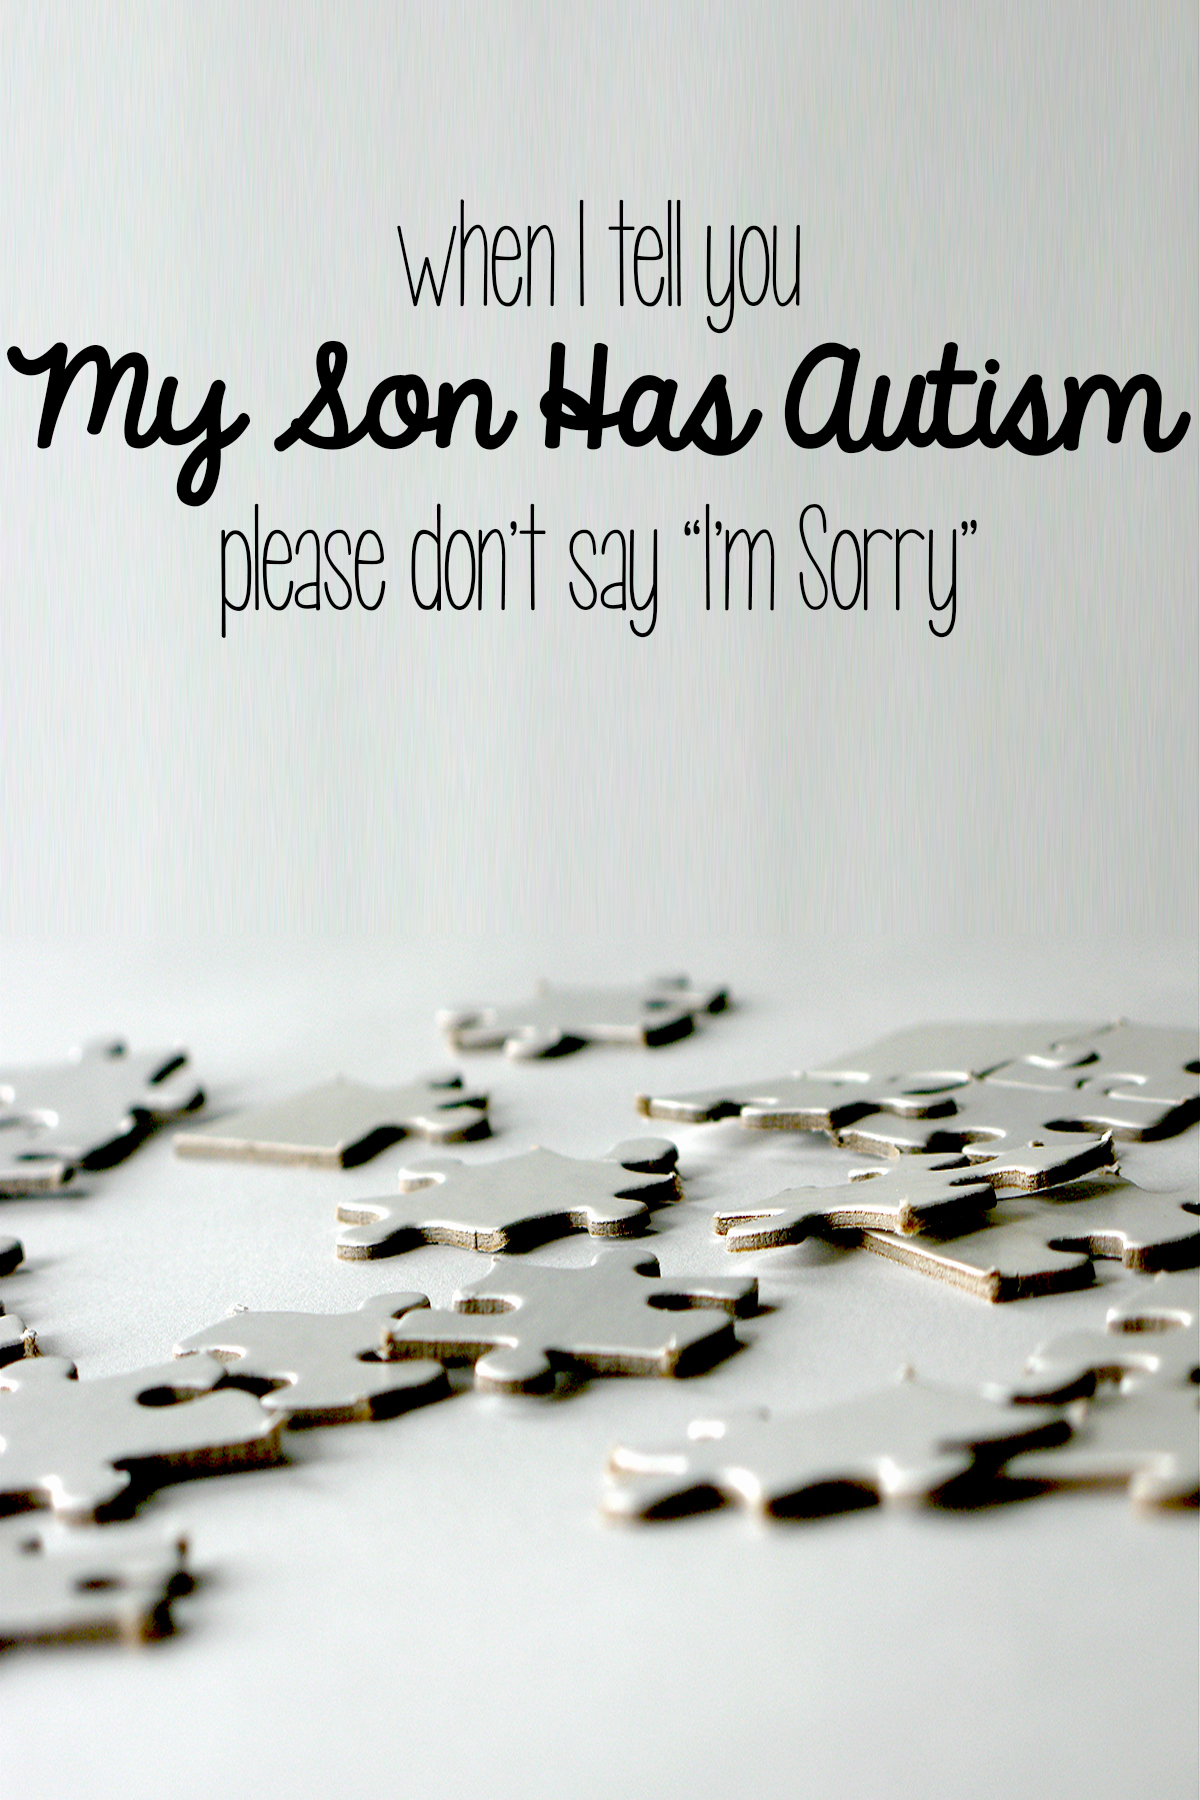 Please don't apologize when you hear about my son's autism diagnosis. He's the same child he was before he was diagnosed with an Autism Spectrum Disorder... it doesn't change him, but here's what his Autism Spectrum diagnosis DOES change.